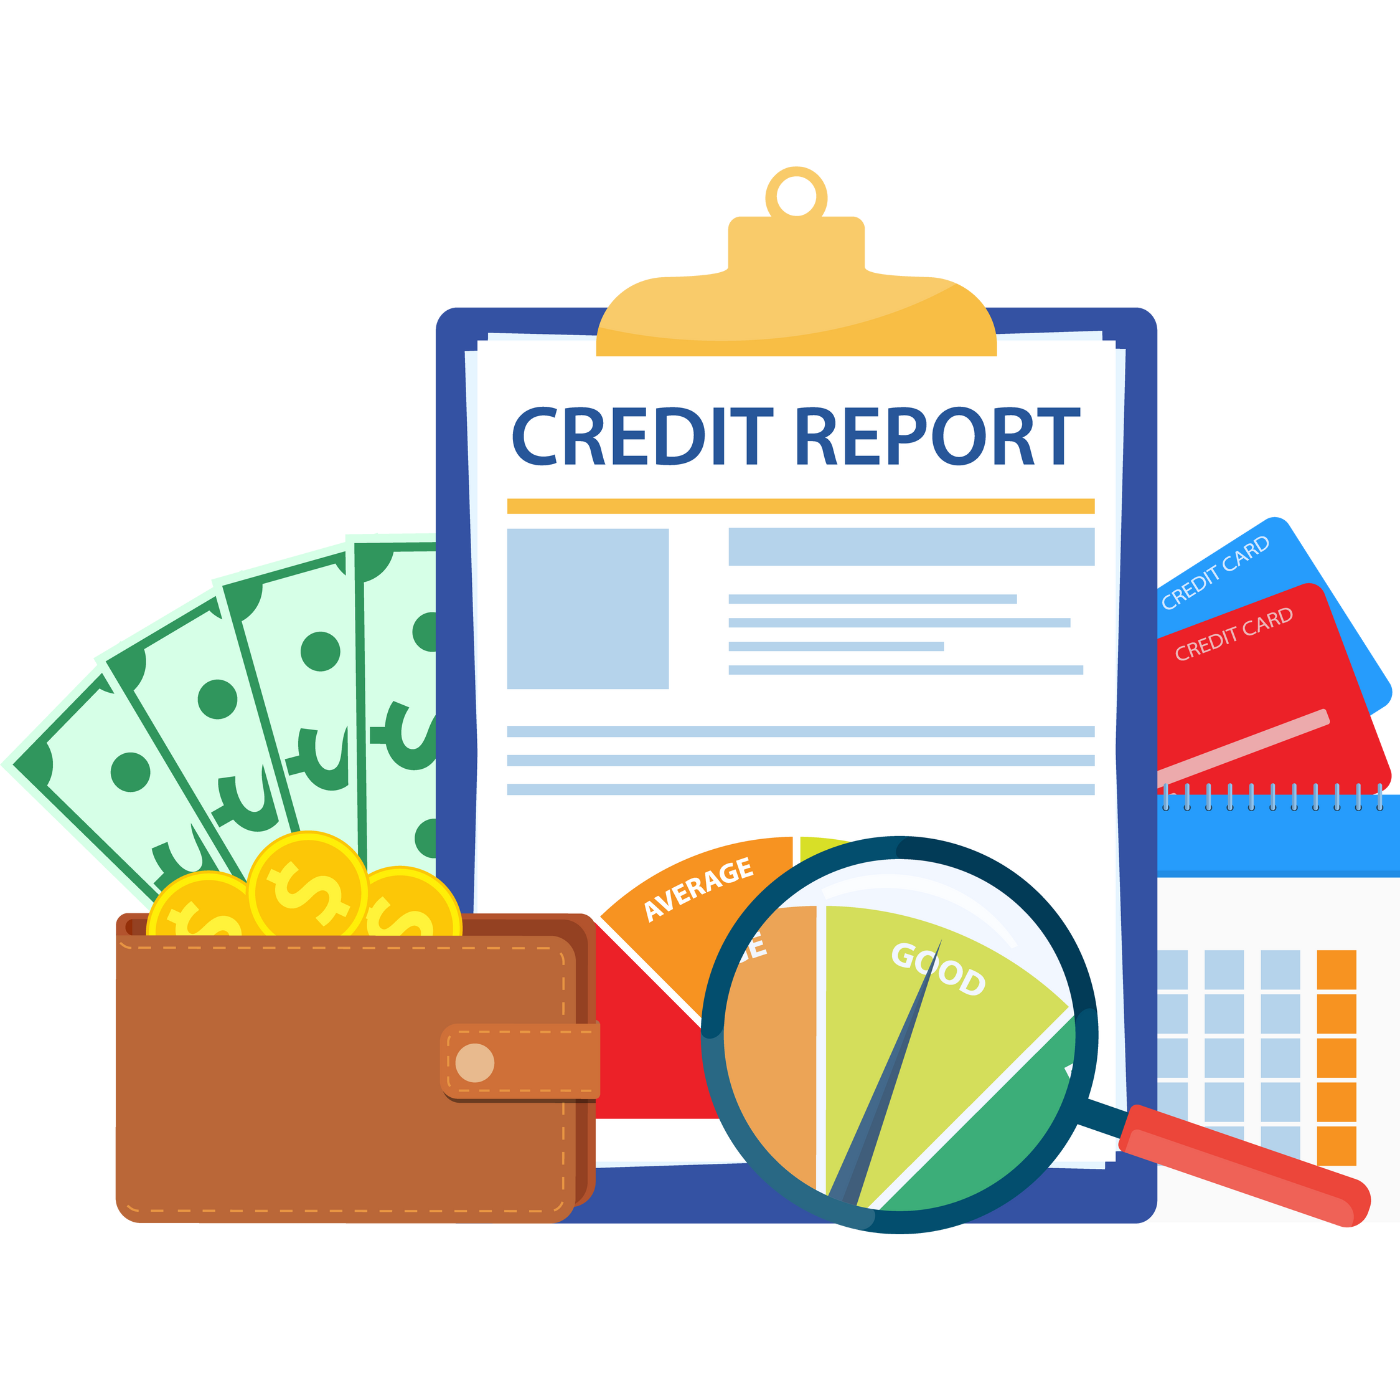 business line of credit